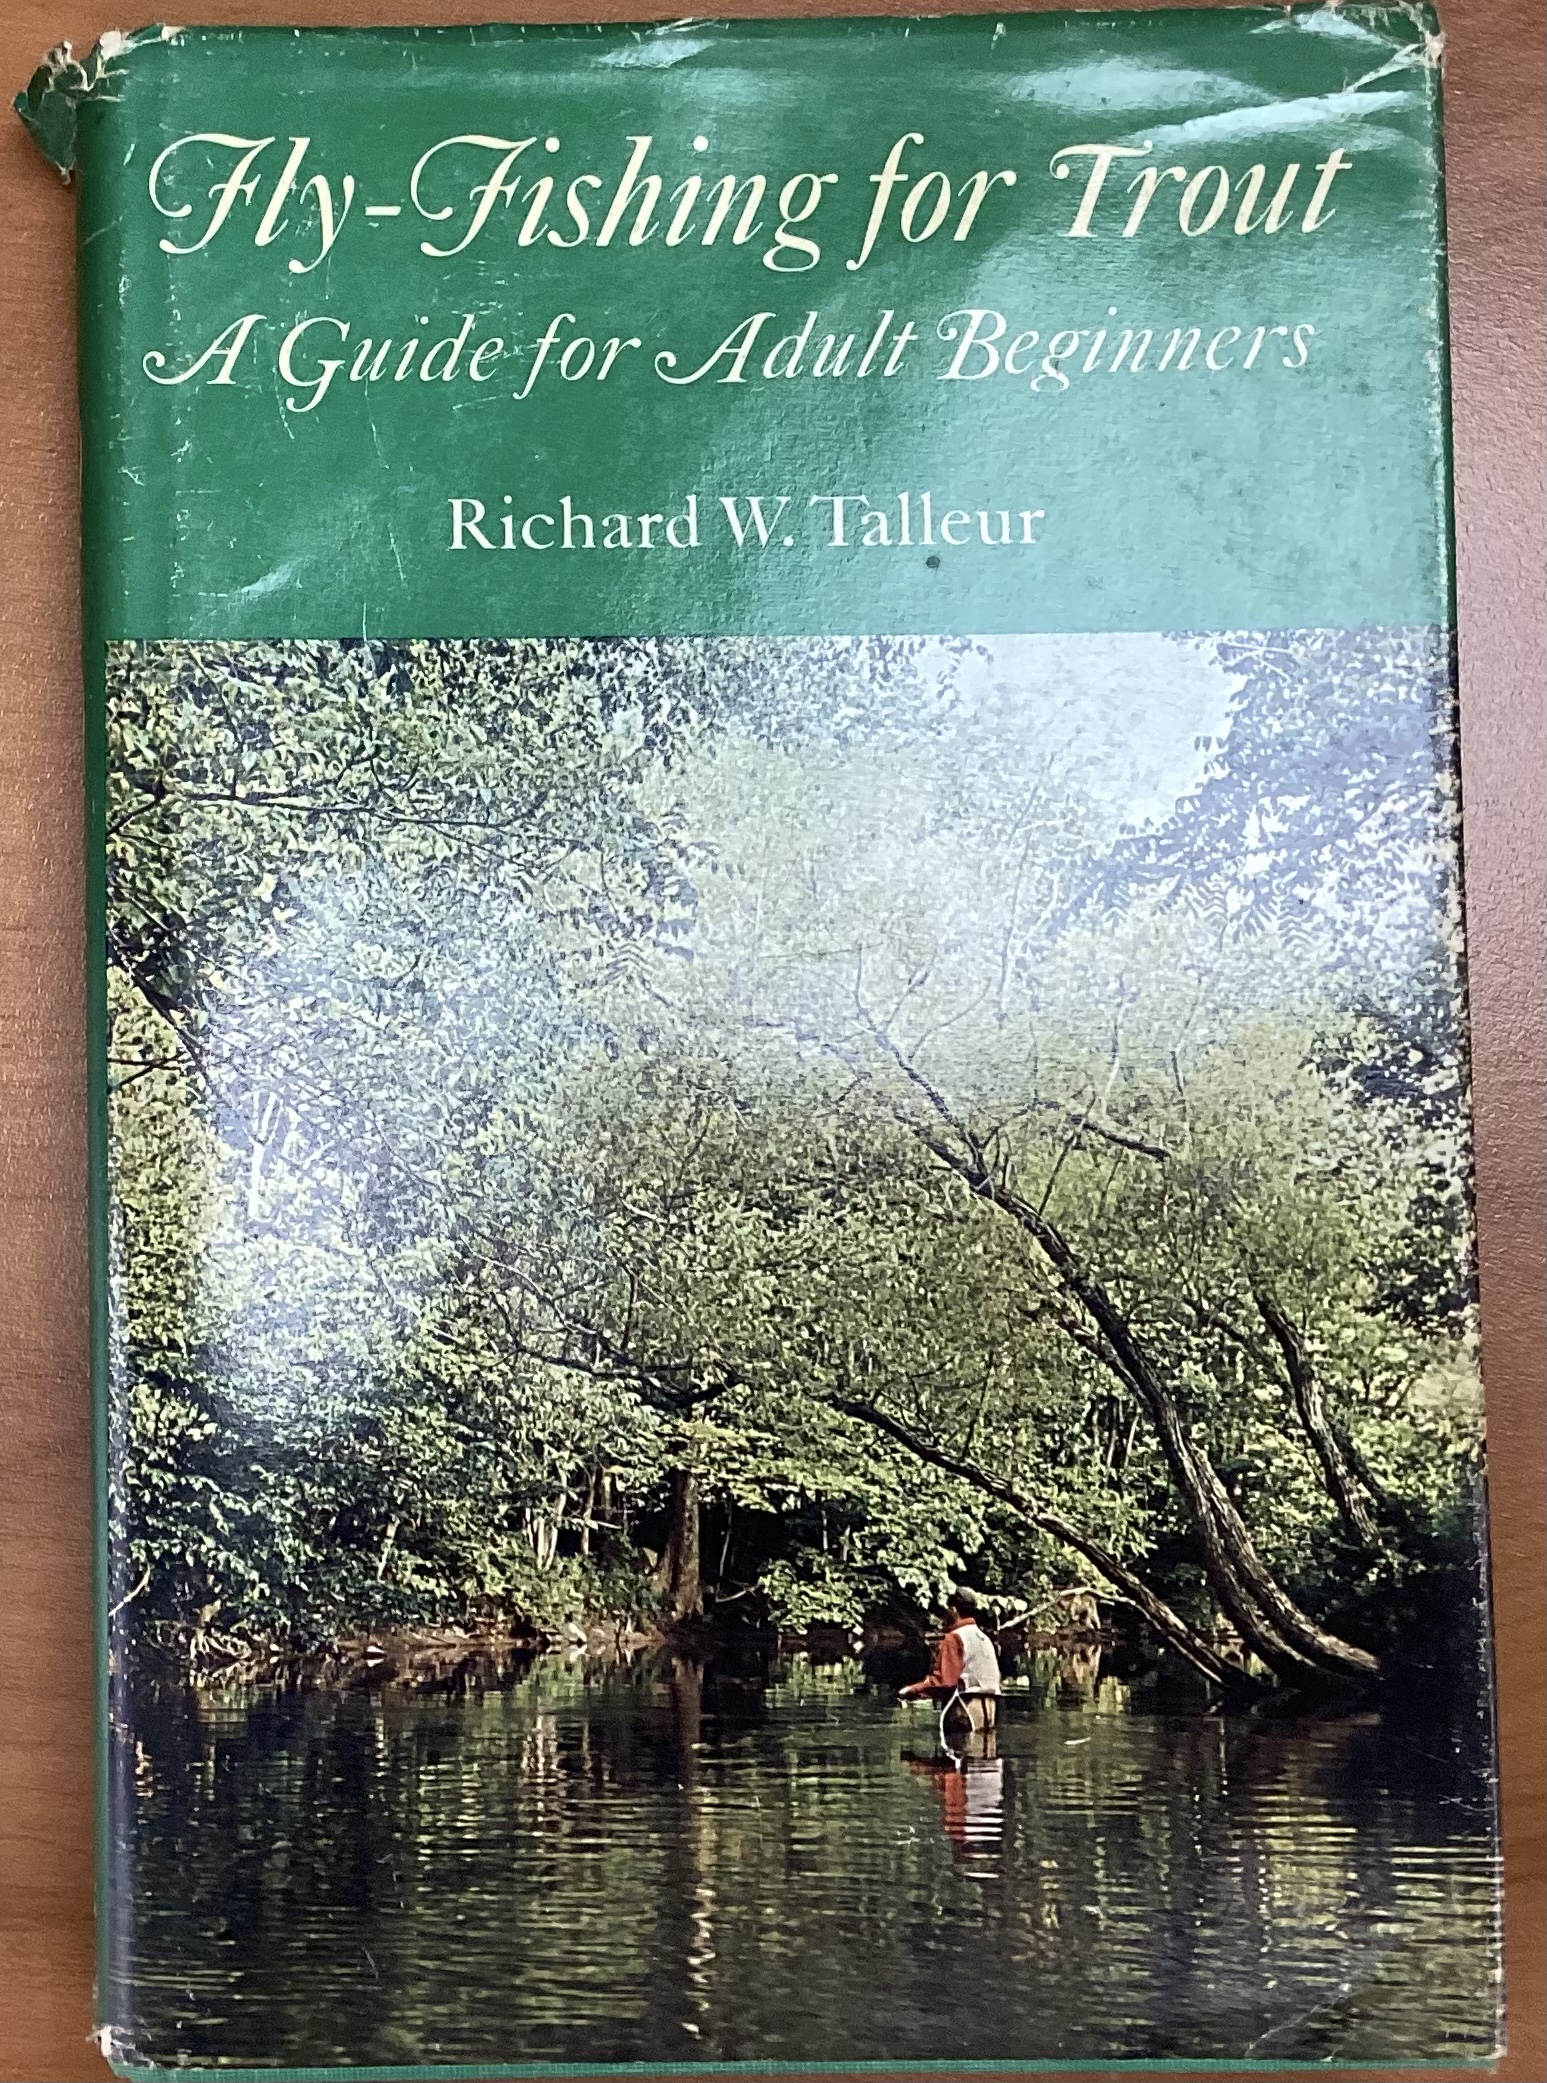 Fly Fishing for Trout a Guide for Adult Beginners; Richard W